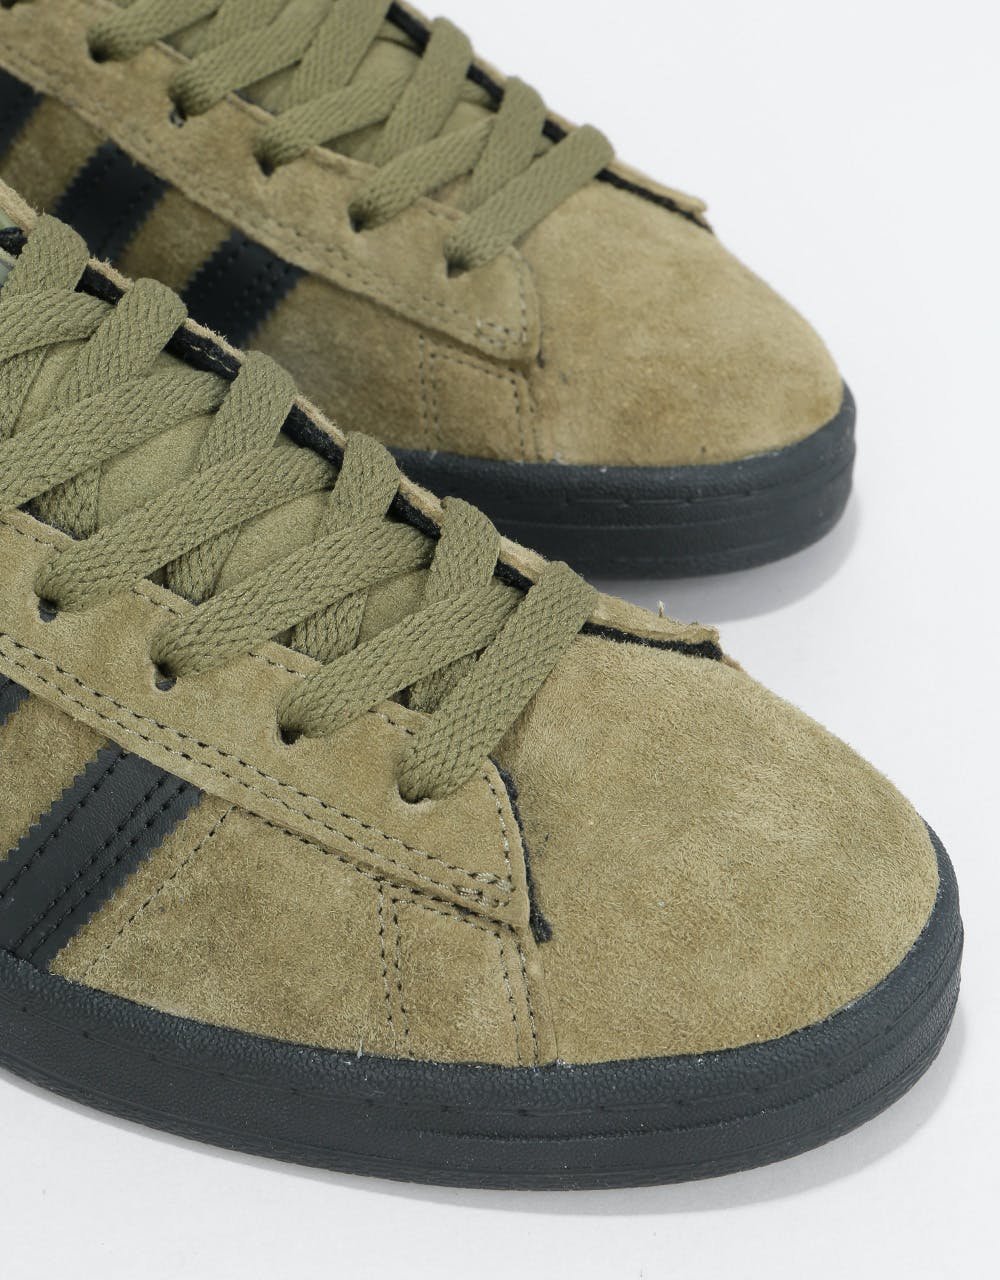 Adidas MJ Campus ADV Skate Shoes - Olive Cargo/Core Black/Gold